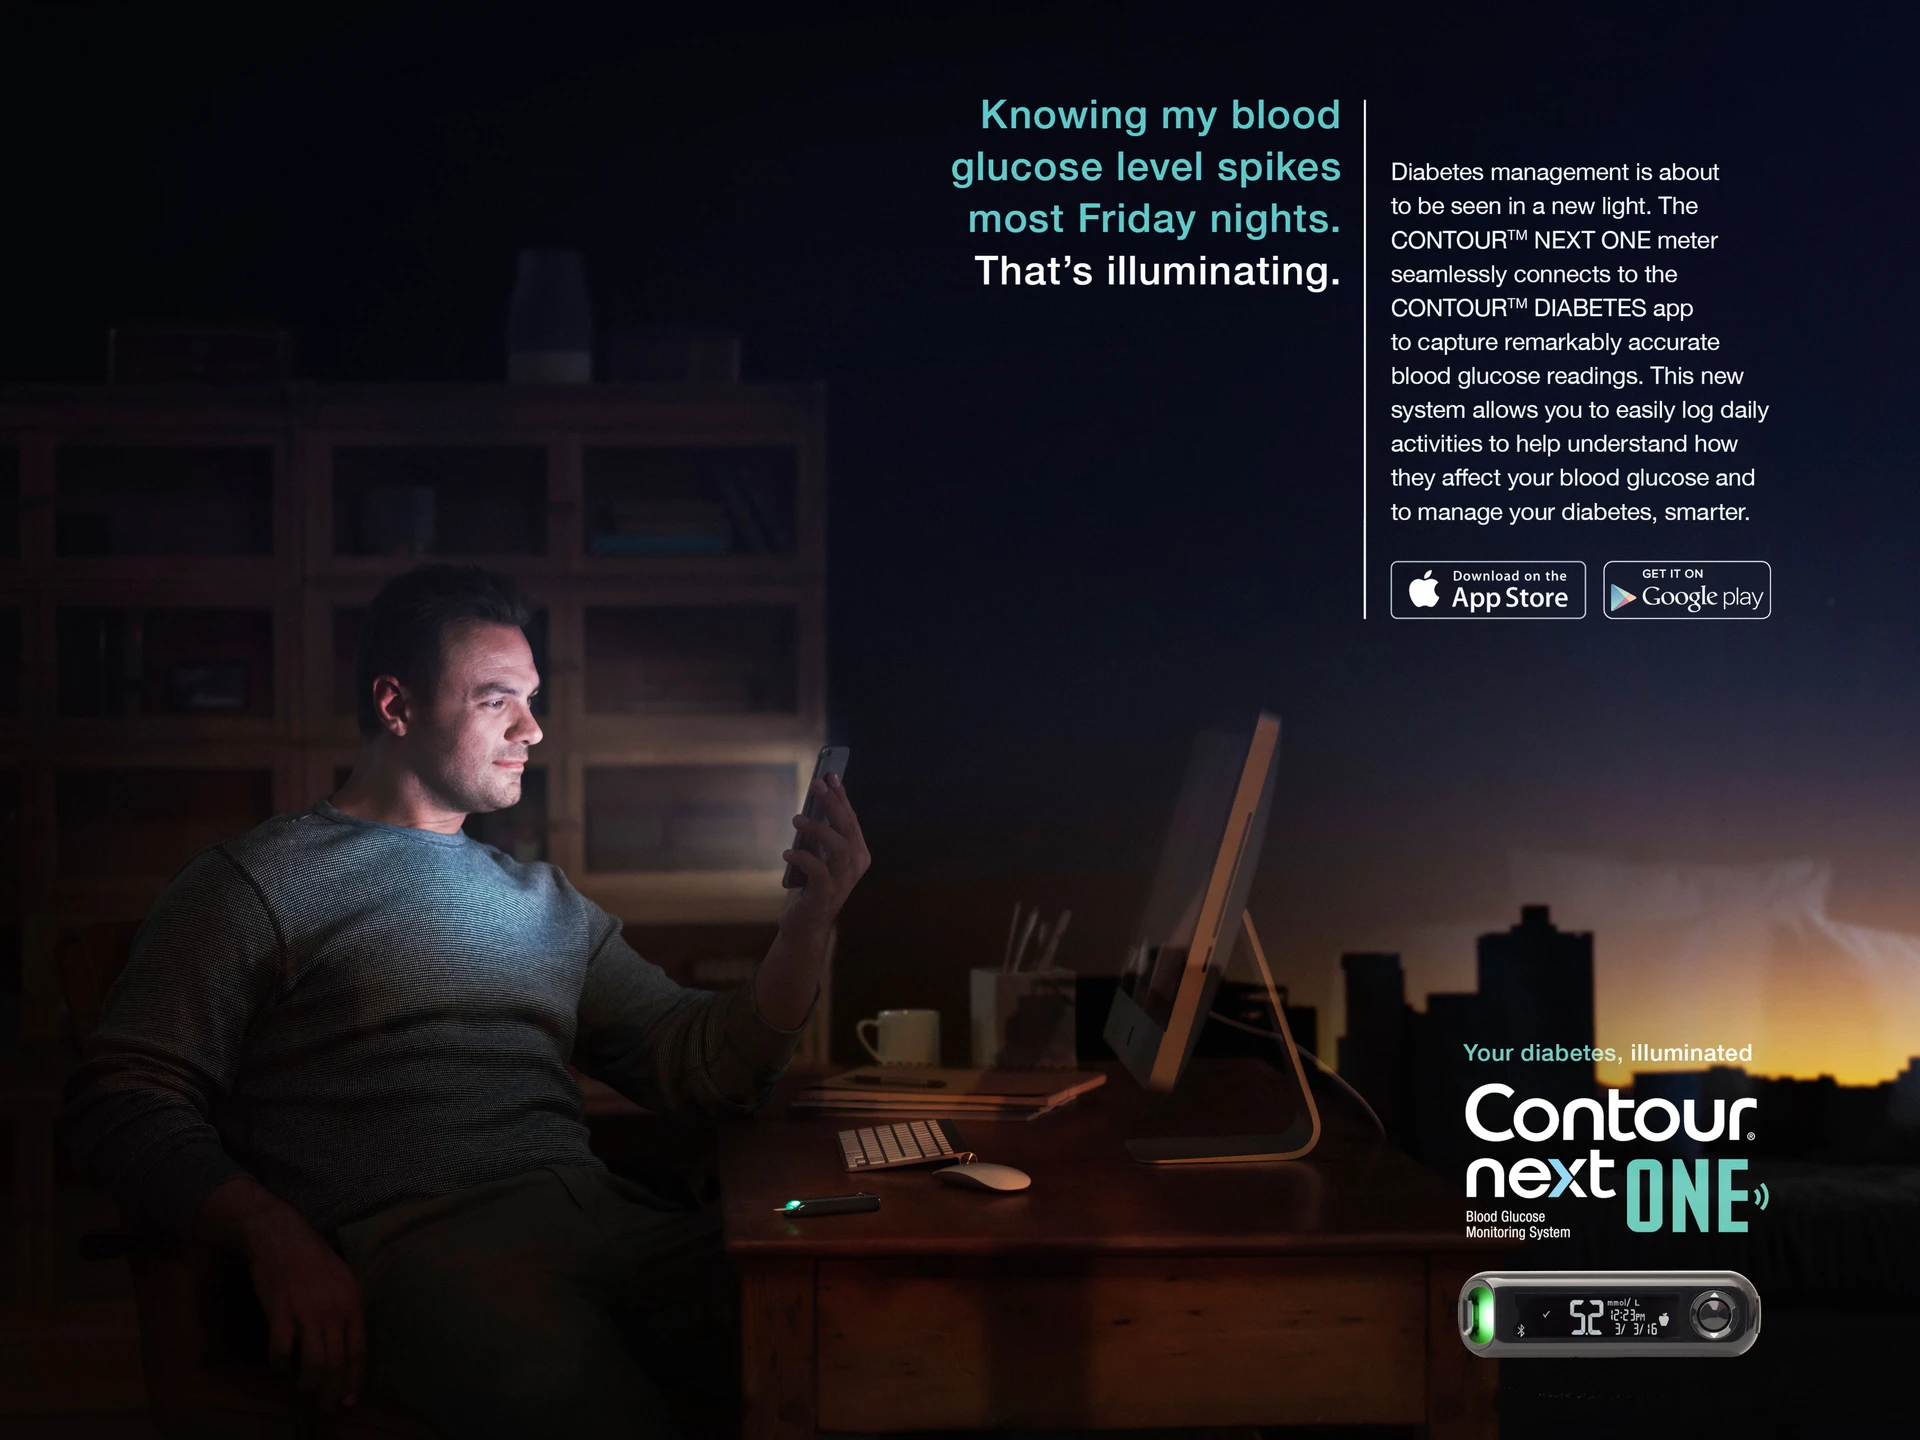 Man checking phone in dimly lit room with diabetes management promotional content highlighting the CONTOUR NEXT ONE meter and app.